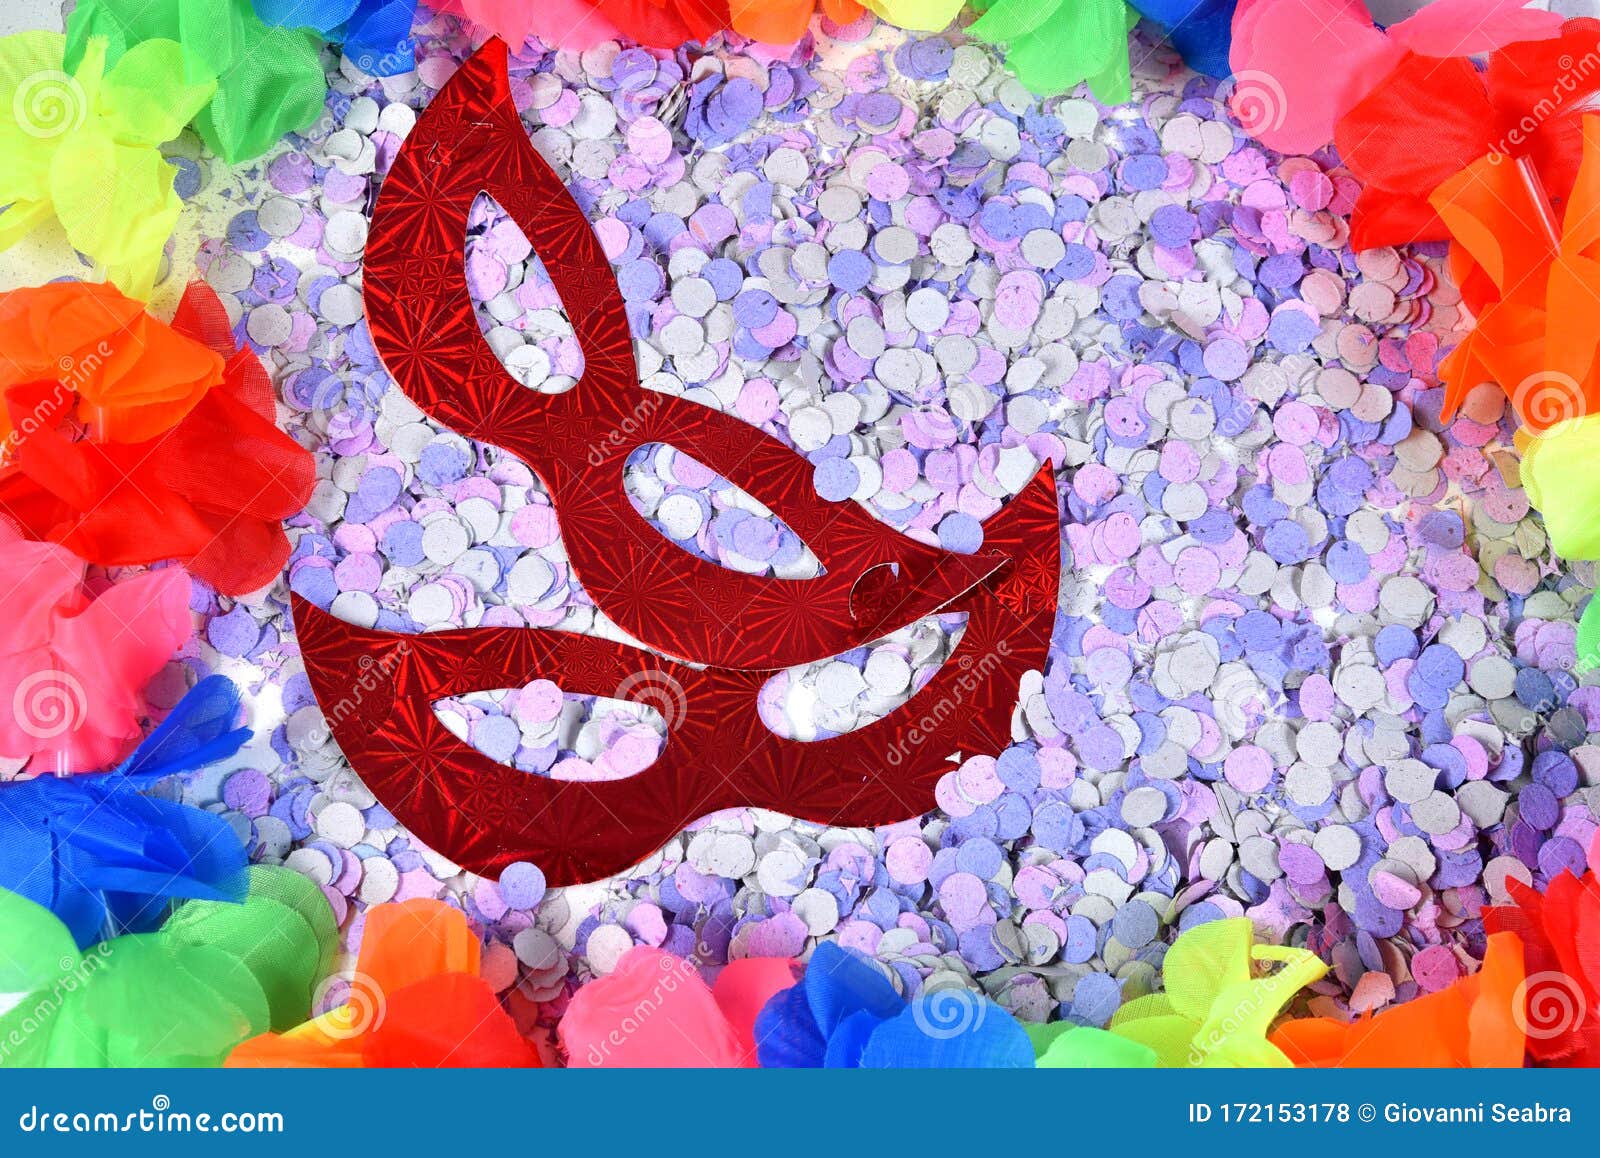 red carnival costume mask in colorful confetti and streamers on pink background with space for text